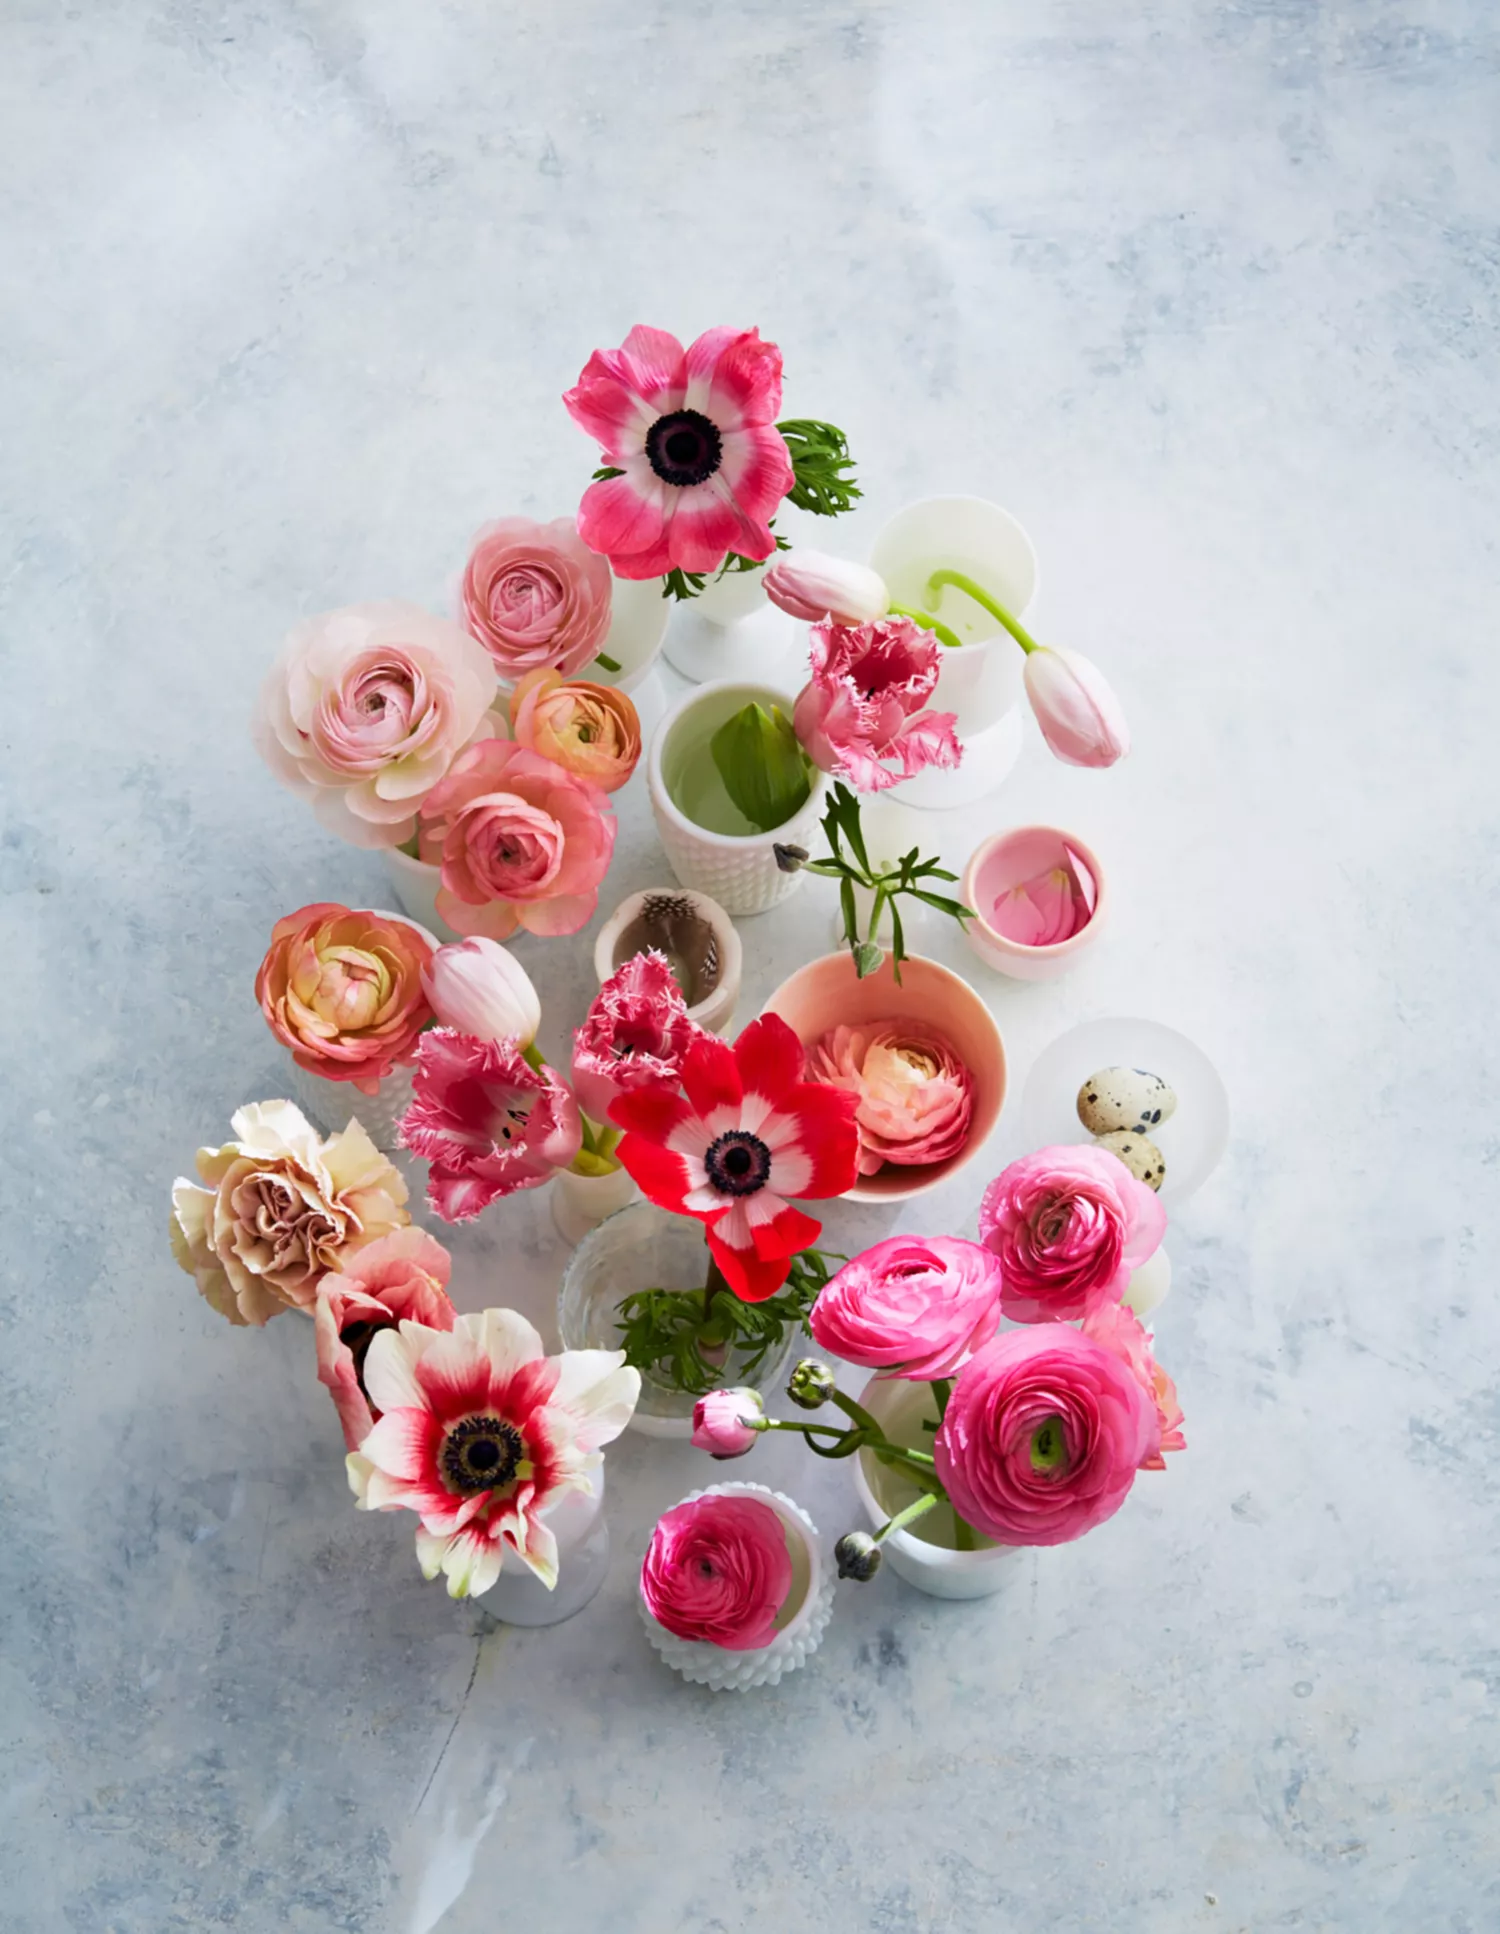 10 Surprising Ways to Display Your Flowers Without a Vase